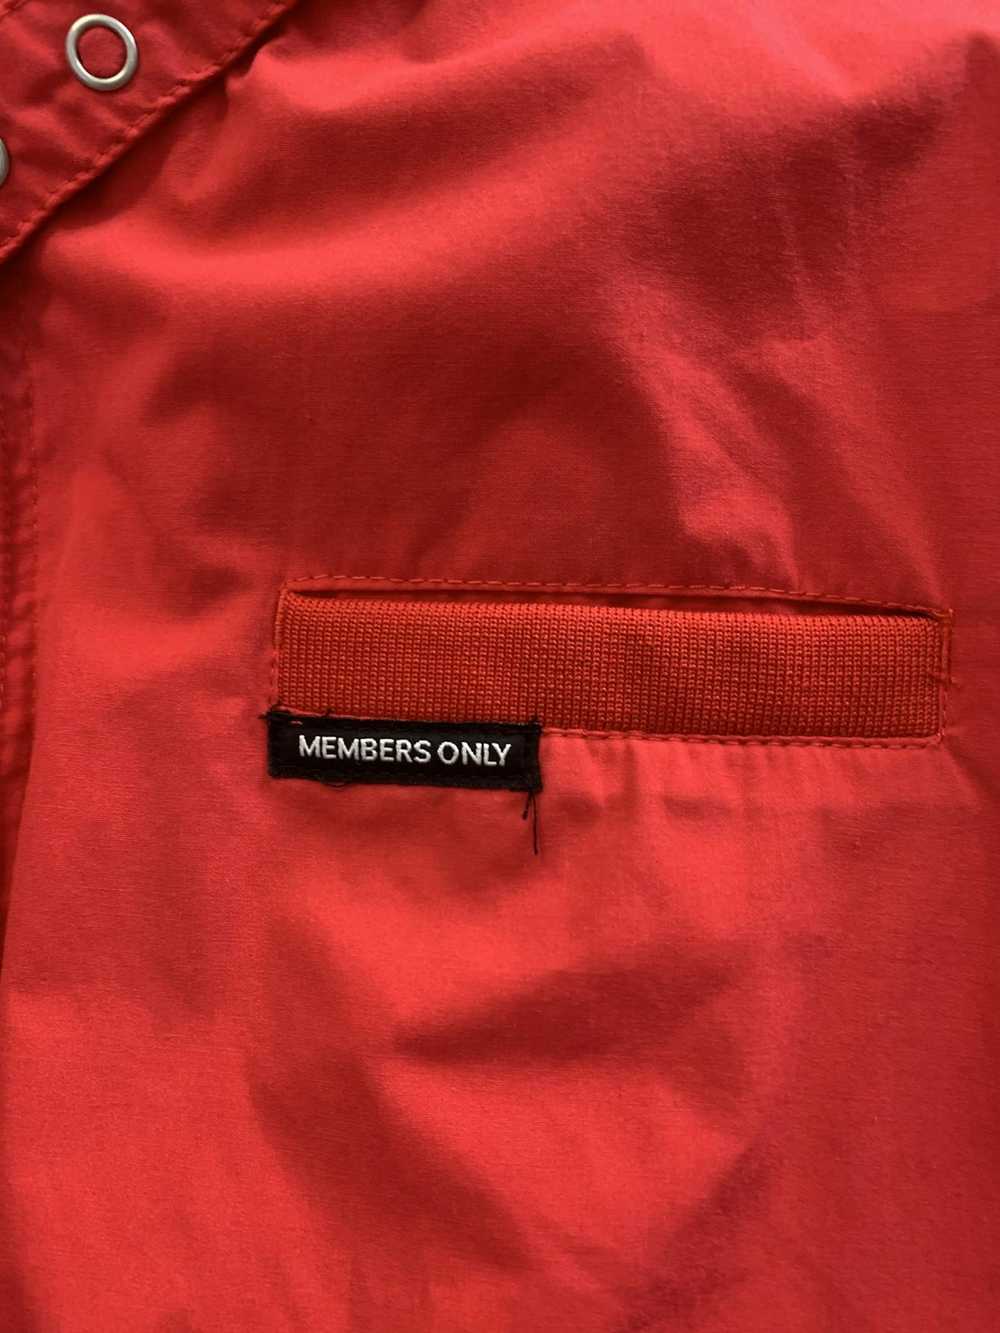 Members Only Vintage Members Only Jacket Red Cafe… - image 3